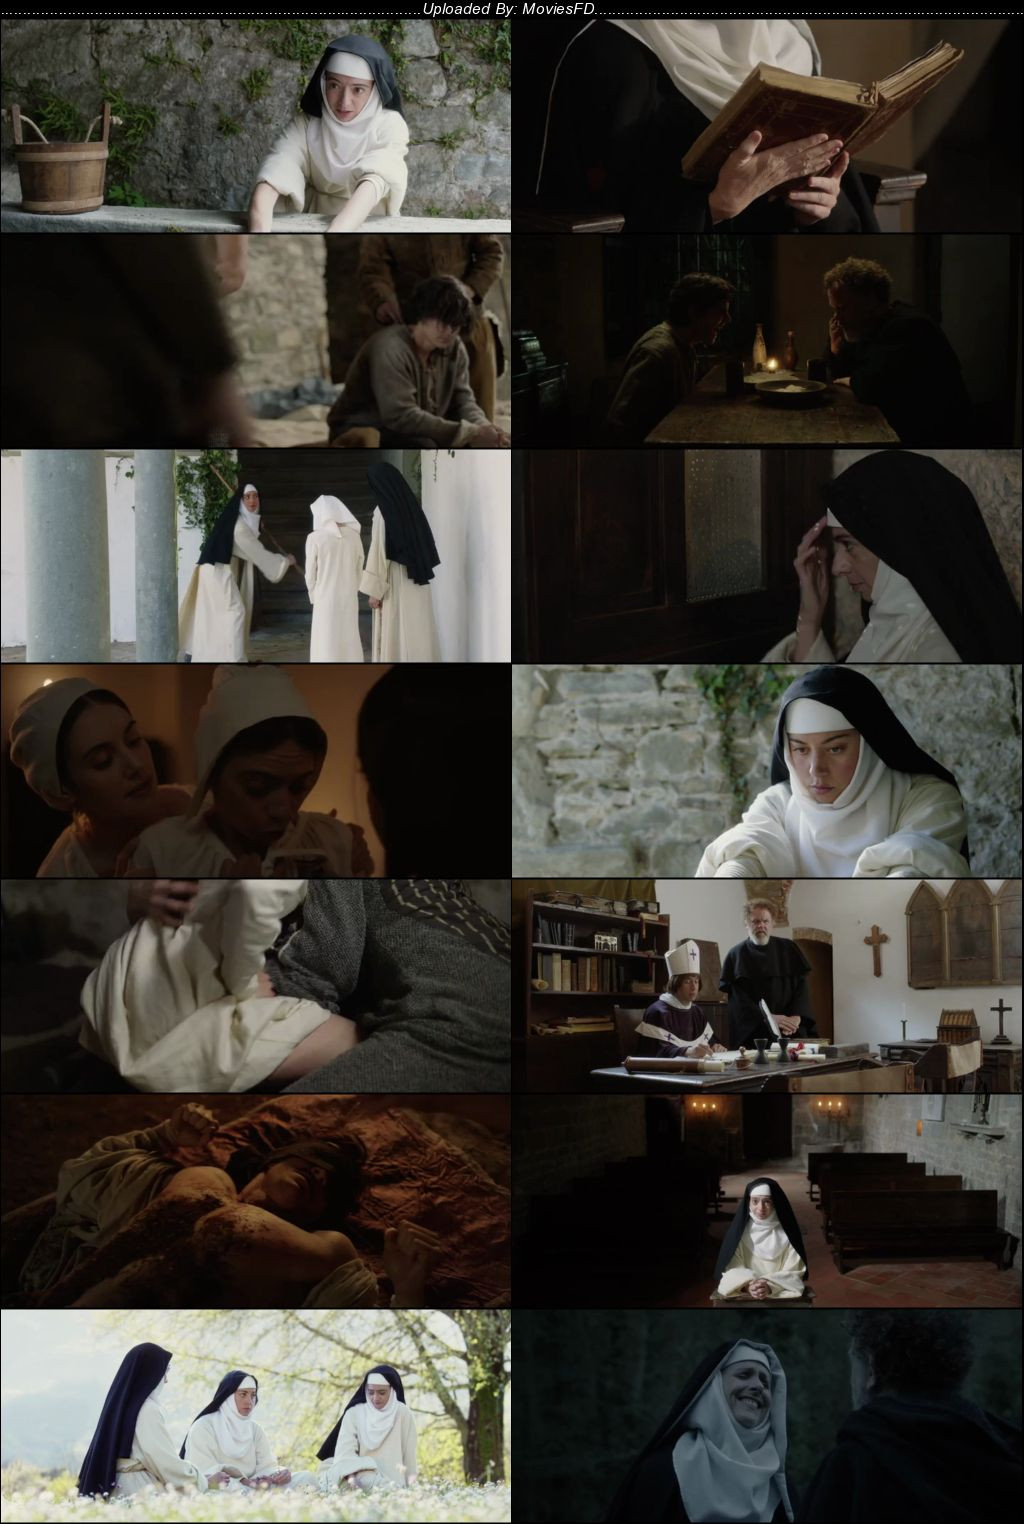 Download The Little Hours (2017) BluRay [Hindi + English] ESub 480p 720p